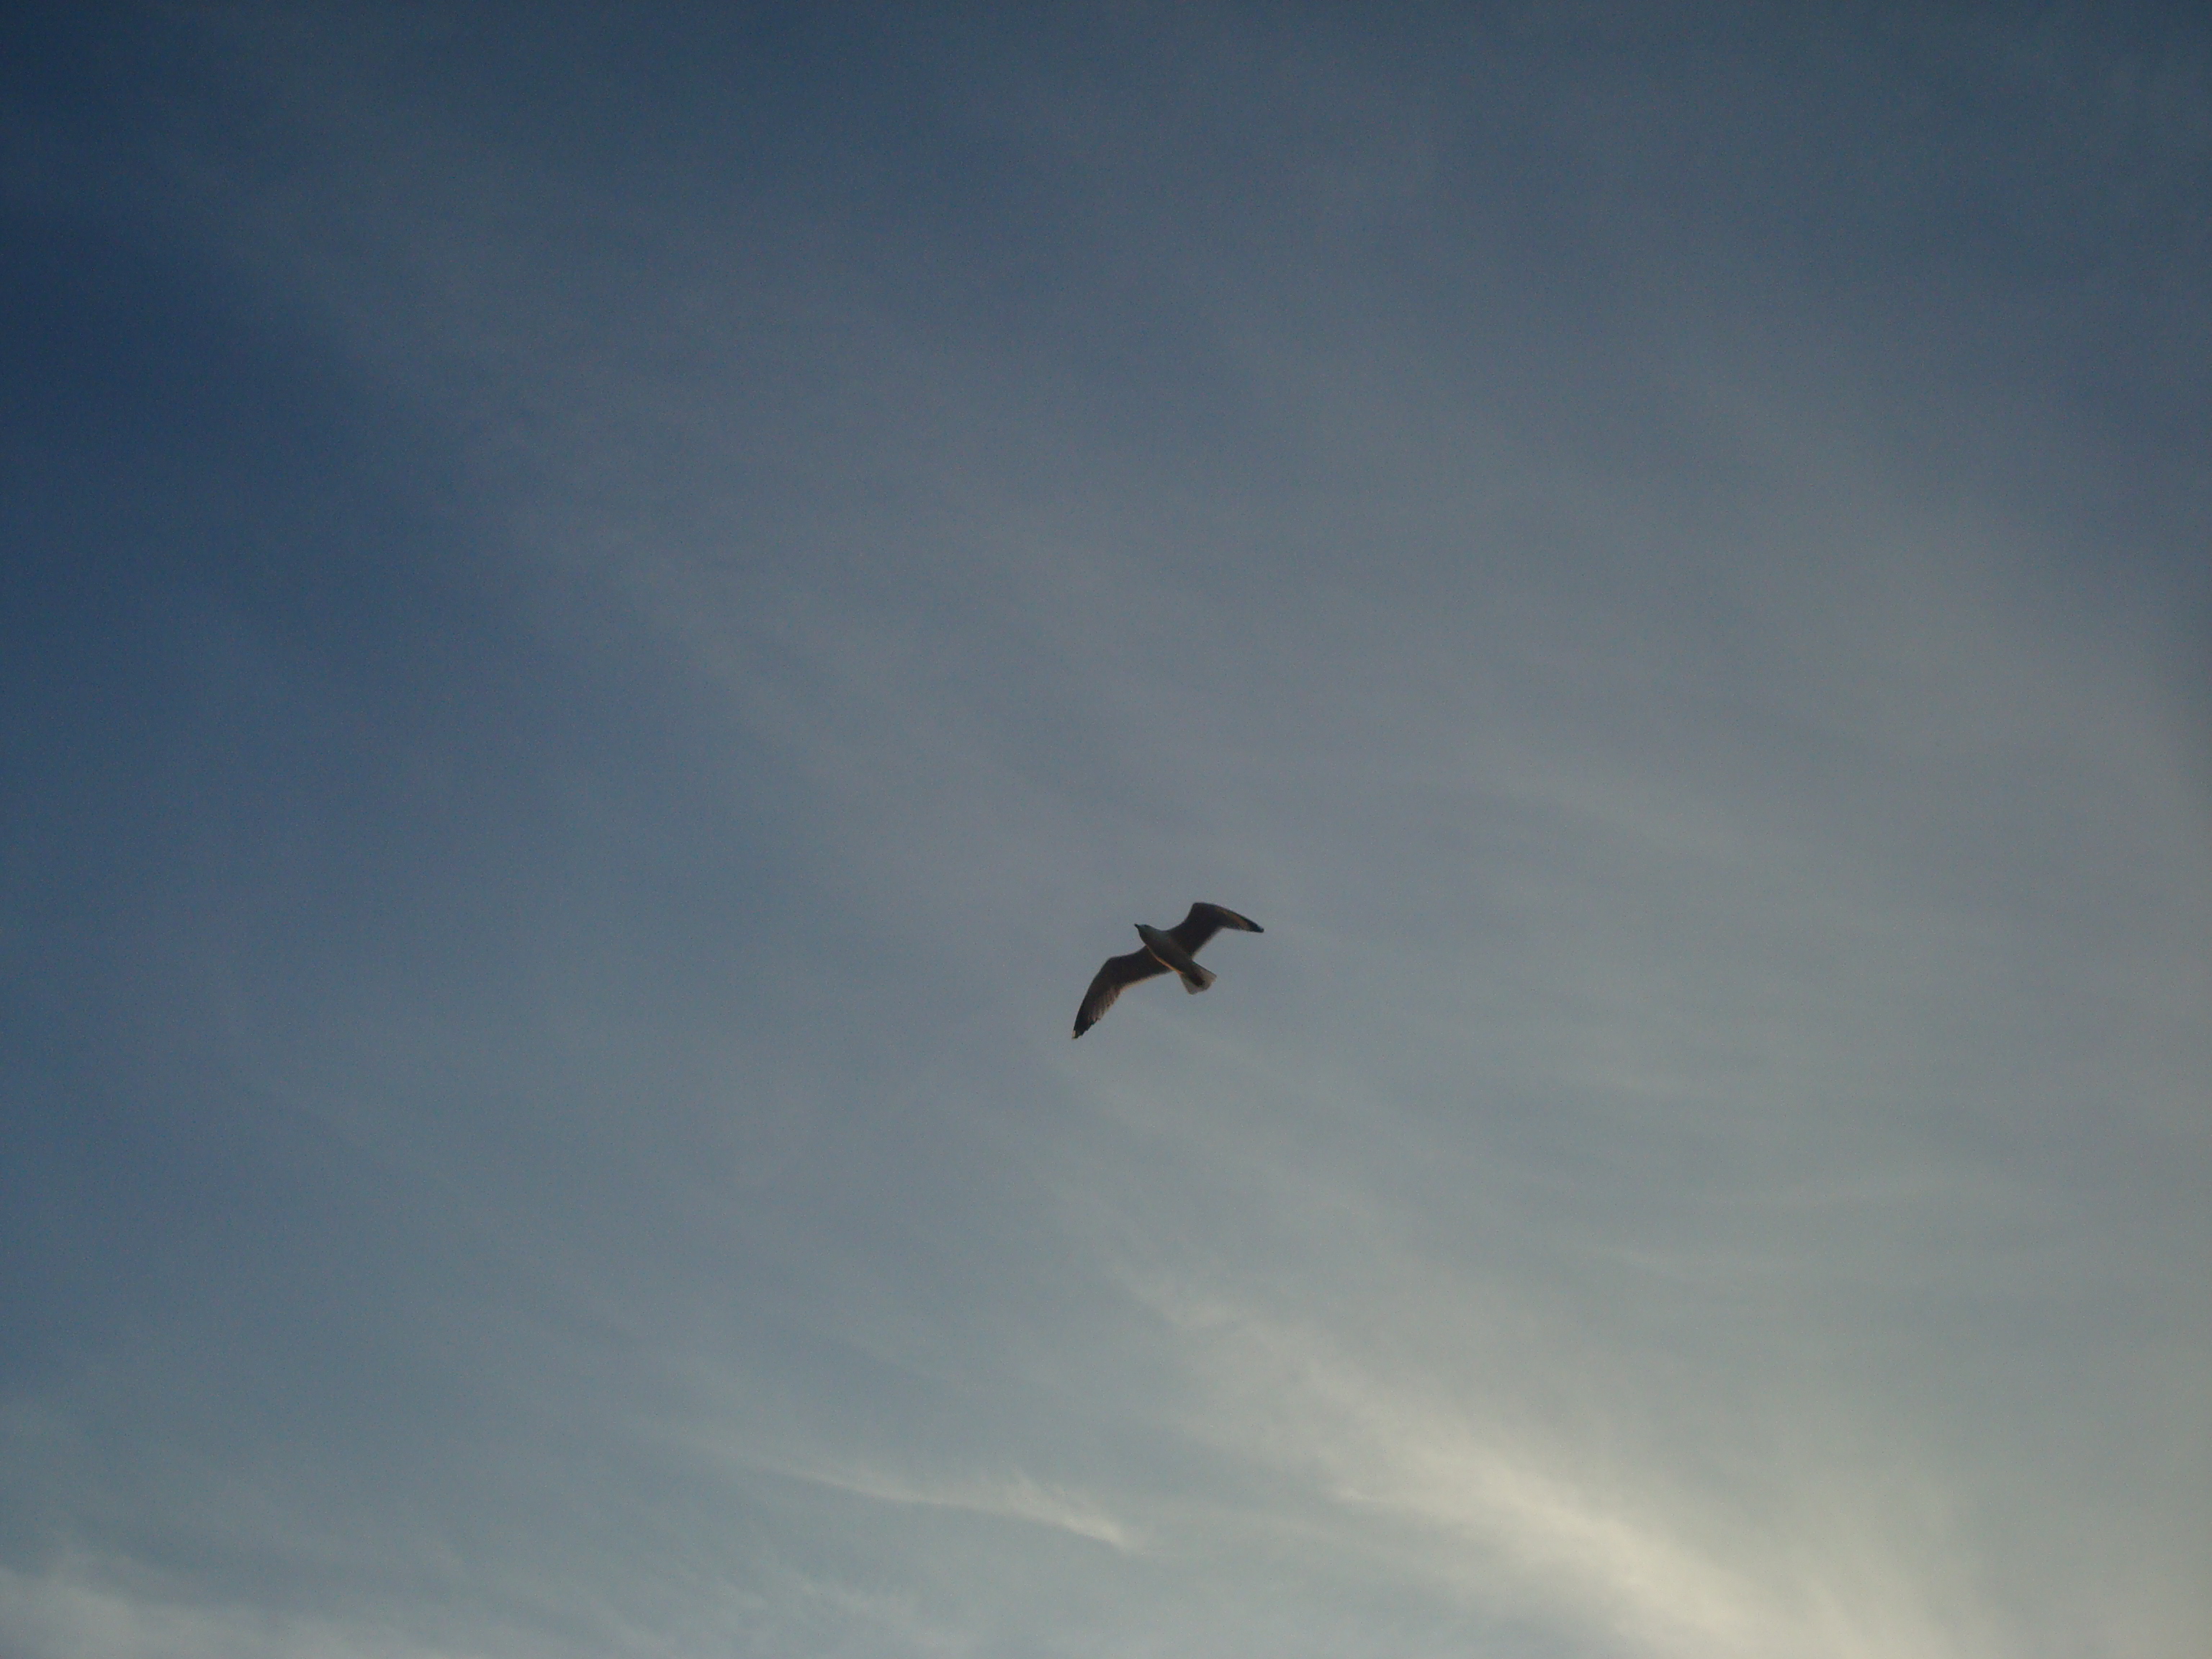 Flying seagull, Animal, Birds, Clouds, Cloudy, HQ Photo